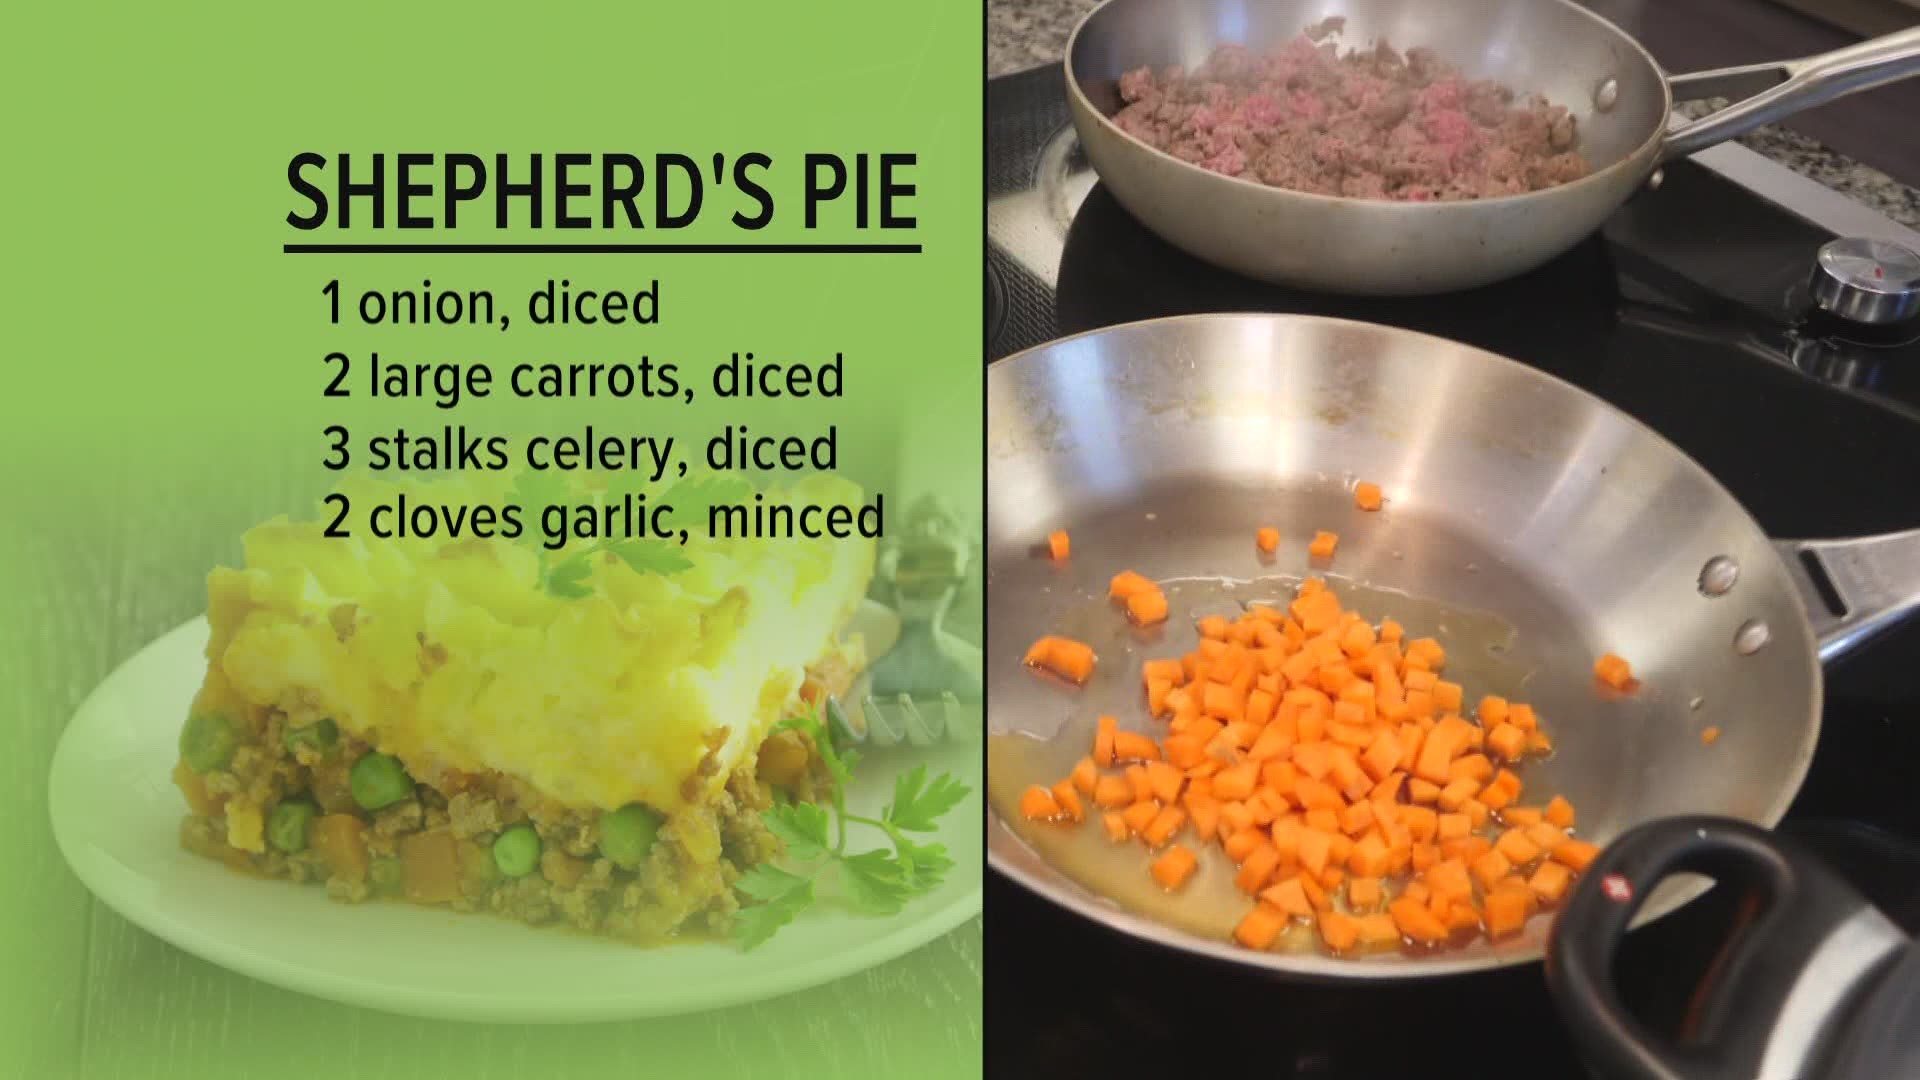 Jan. 15, 2021: Looking for some good comfort food? We went to chef Josh Ingraham of Go Buddha for a Whole30 recipe on how to make shepherd's pie.